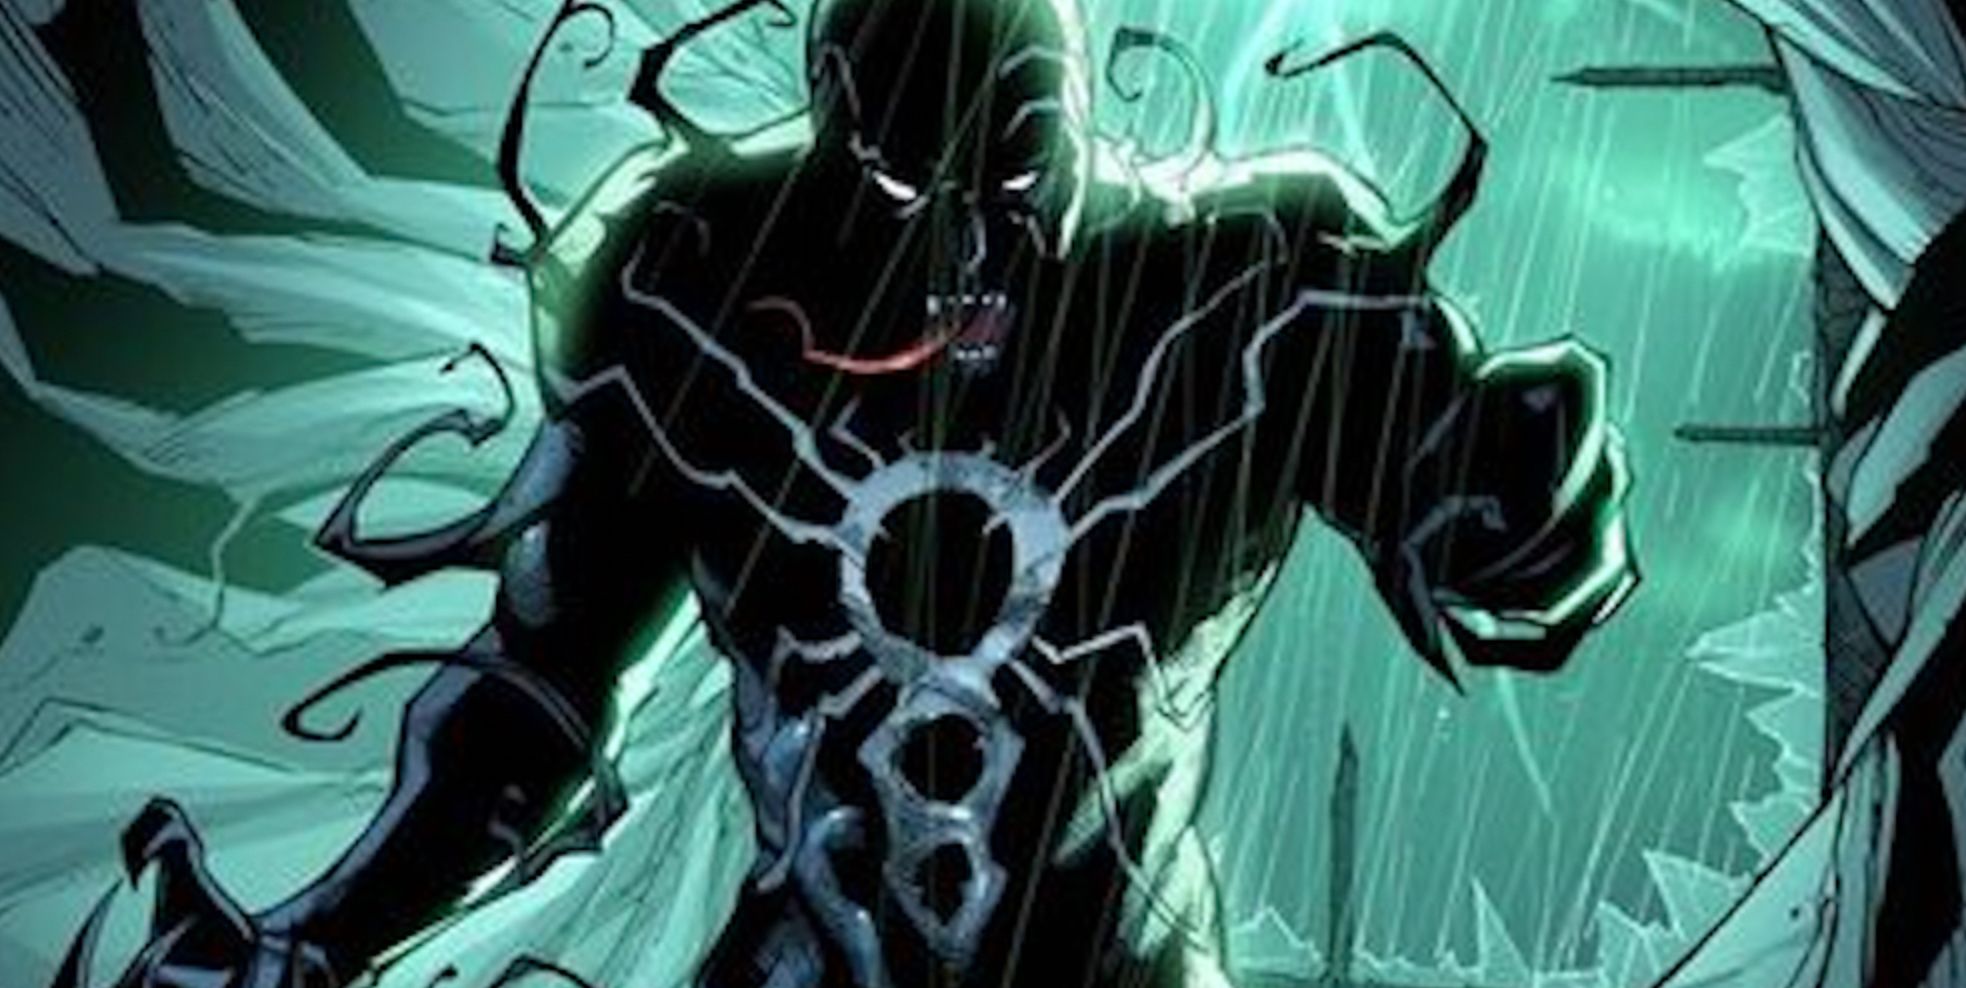 Peter Parker appears bonded to both Venom and a Poison in Marvel comics